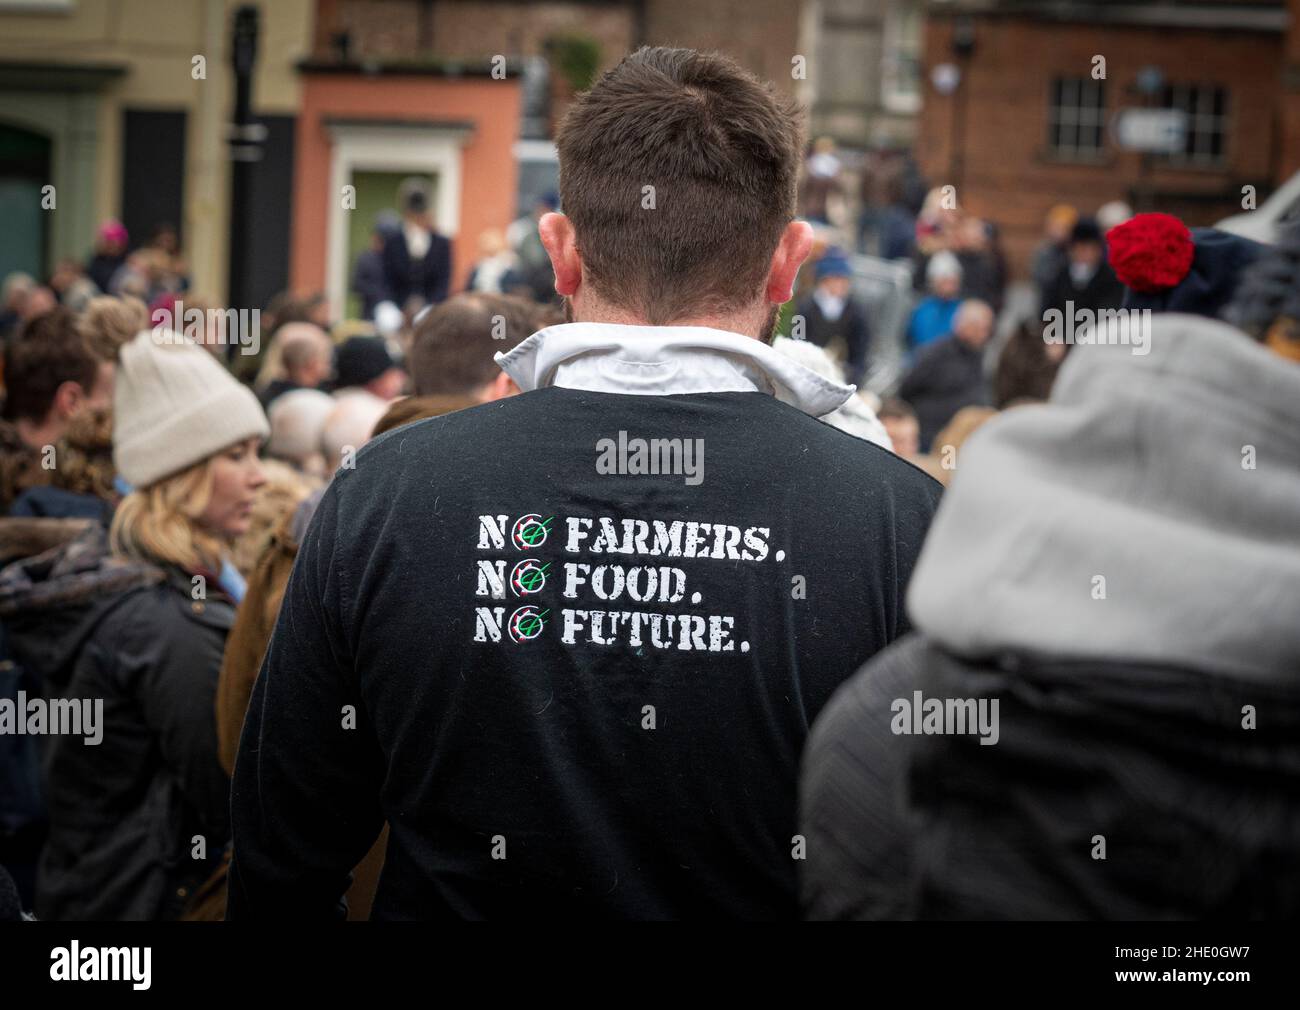 No farmers. No Food. No future. Slogan on the back of a black rugby shirt worn by a spectator in Malton at start of the Middleton Boxing day hunt. Stock Photo